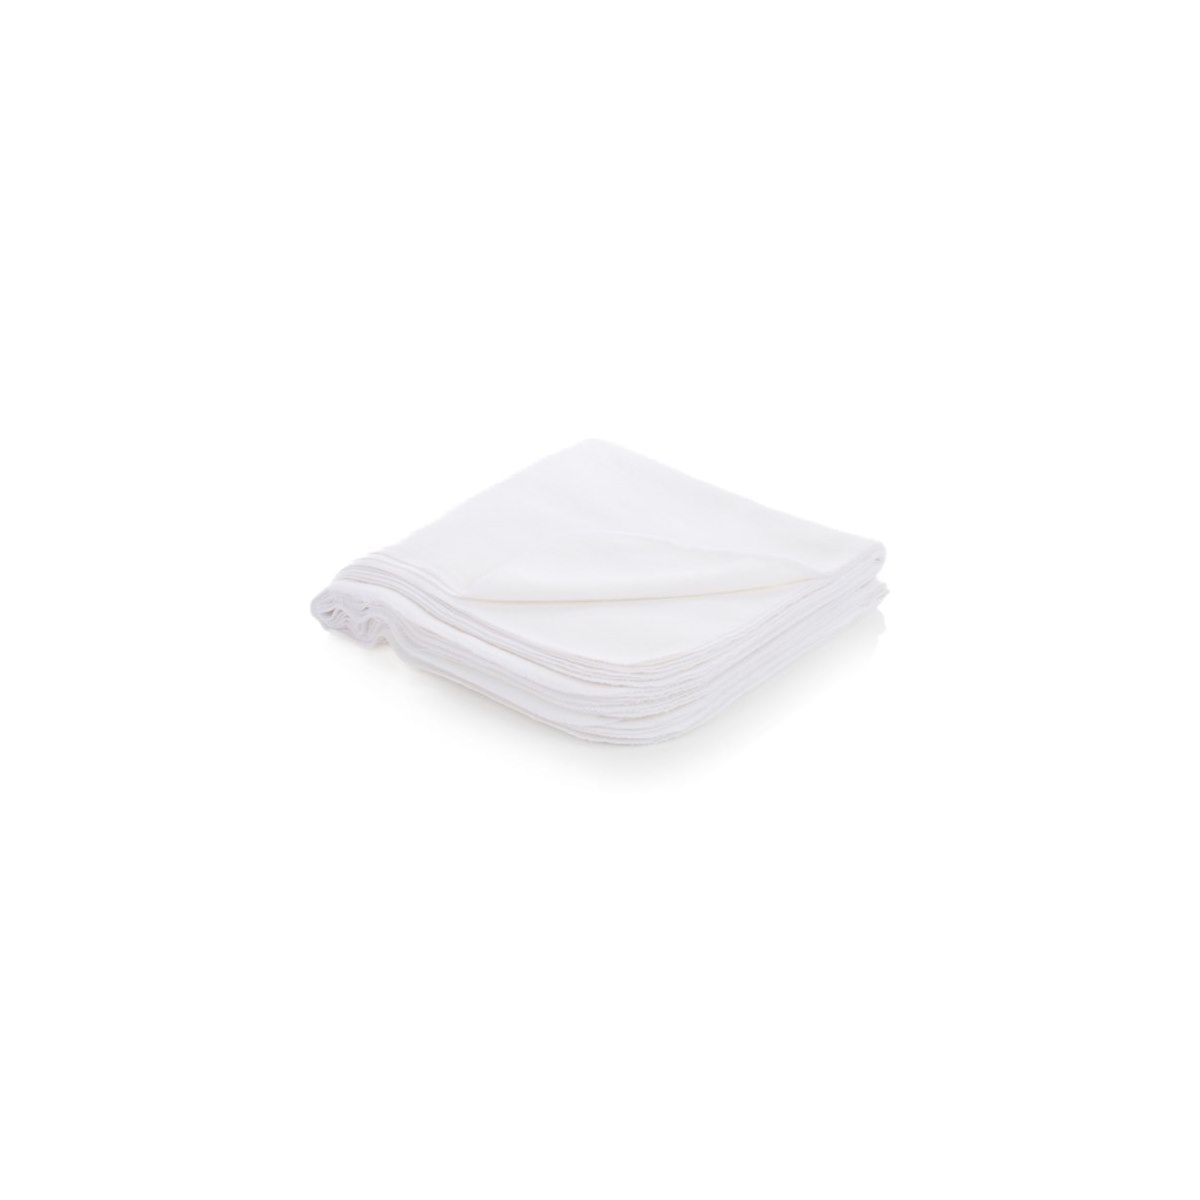 Pack of 10 x Leecroft Quality UK Made Duster Size: 50 x 50cm